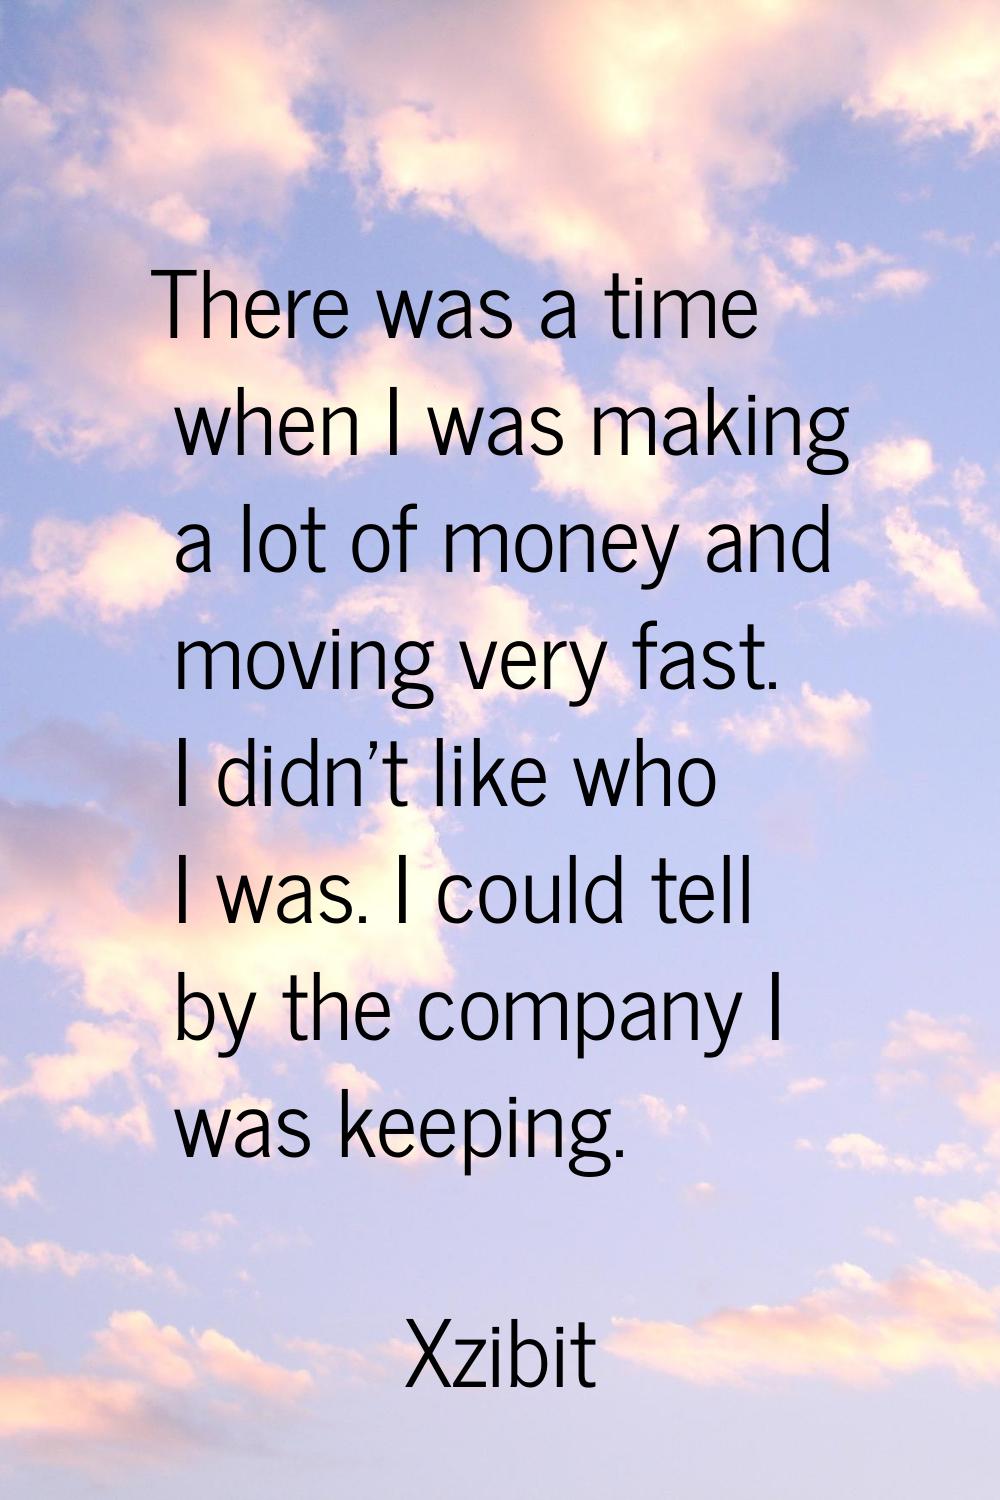 There was a time when I was making a lot of money and moving very fast. I didn't like who I was. I 